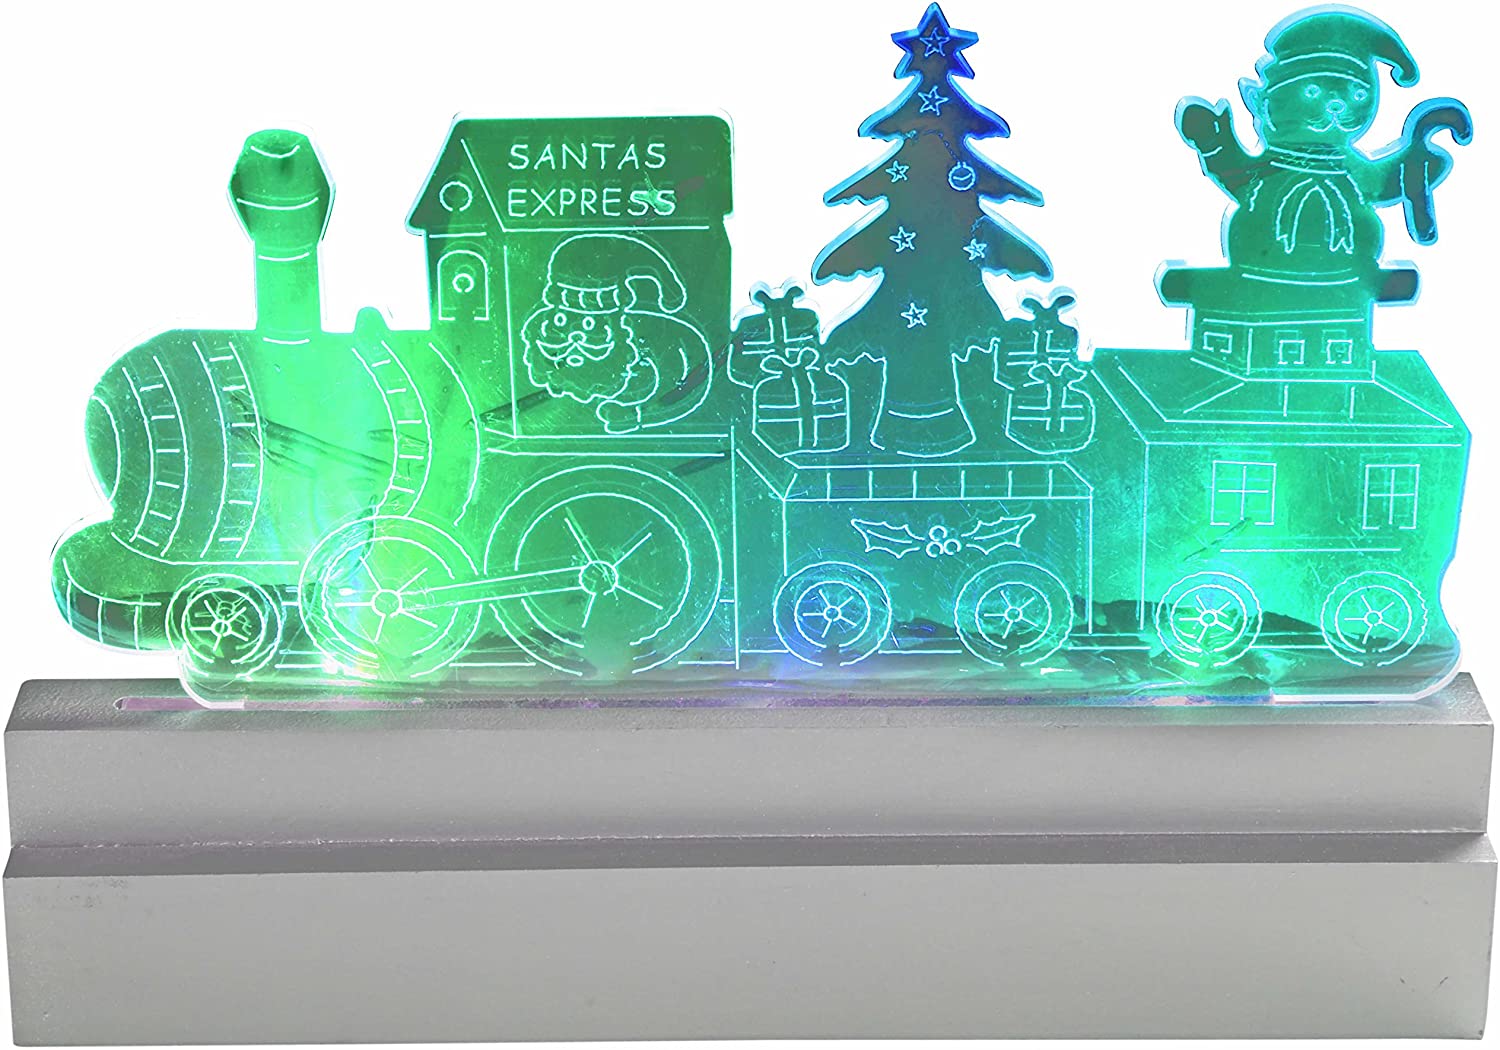 WeRChristmas 23 cm Pre Lit Acrylic Santa Express Train Table Christmas Decoration with Colour Changing LED